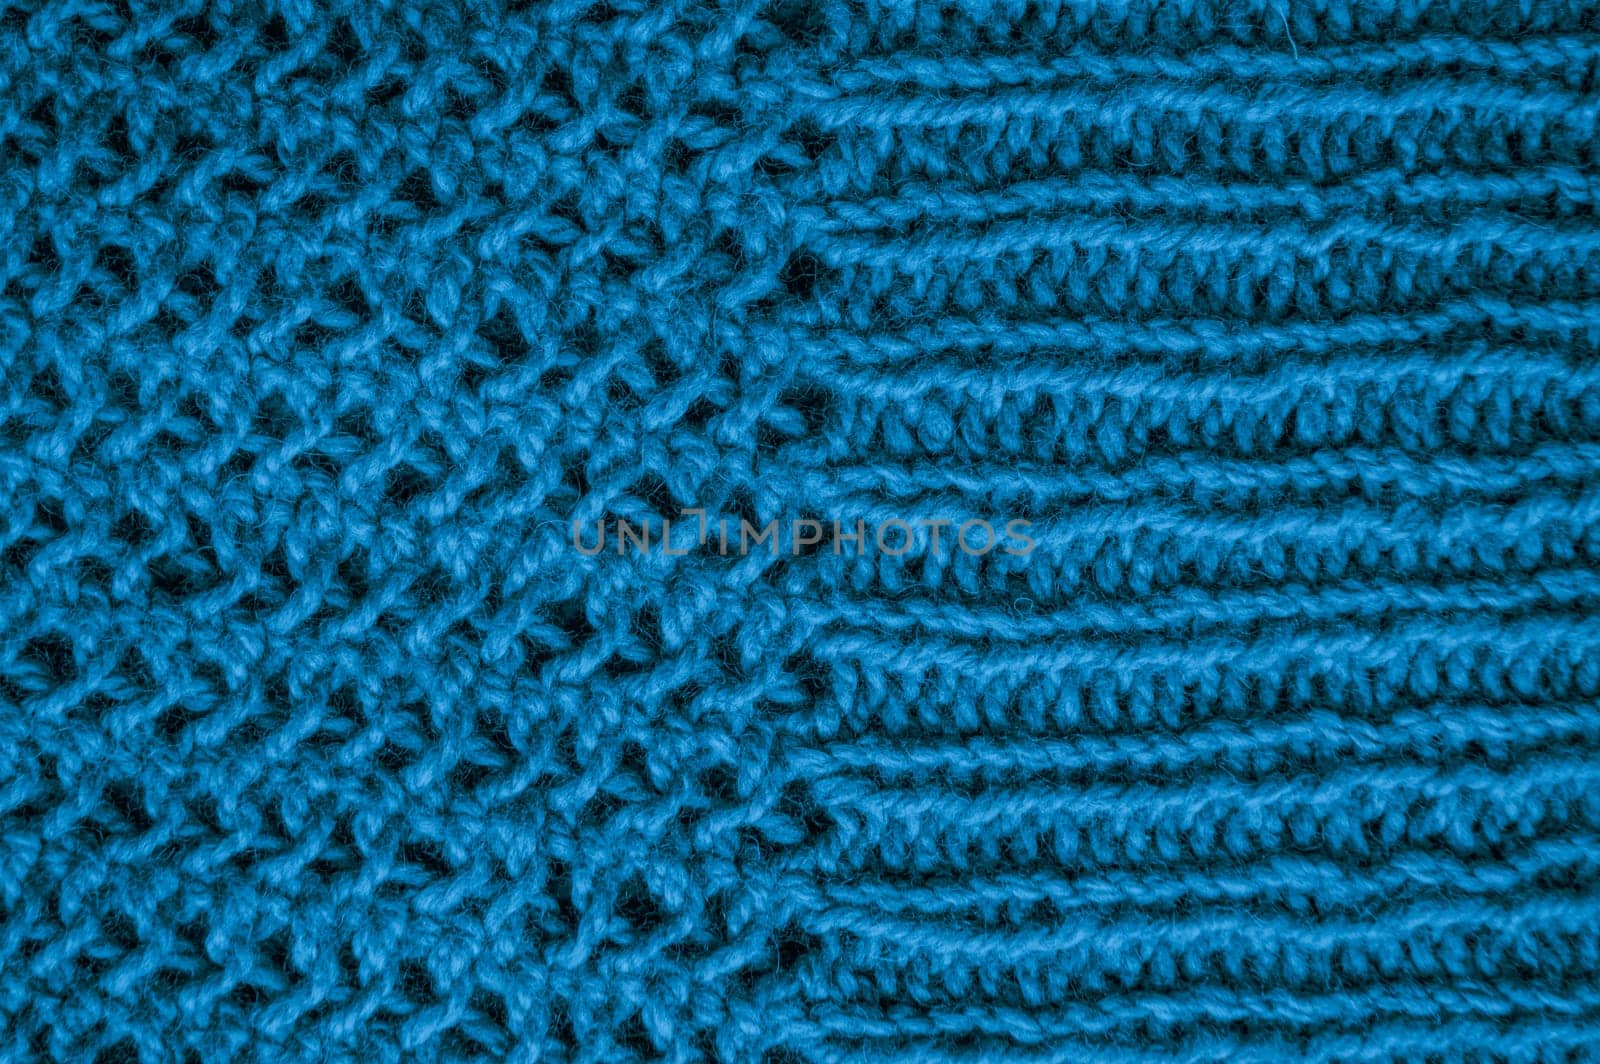 Structure Knitted Sweater. Abstract Woolen Textile. Jacquard Warm Background. Knitted Blanket. Blue Linen Thread. Nordic Holiday Print. Fiber Canvas Wallpaper. Soft Knitted Blanket.